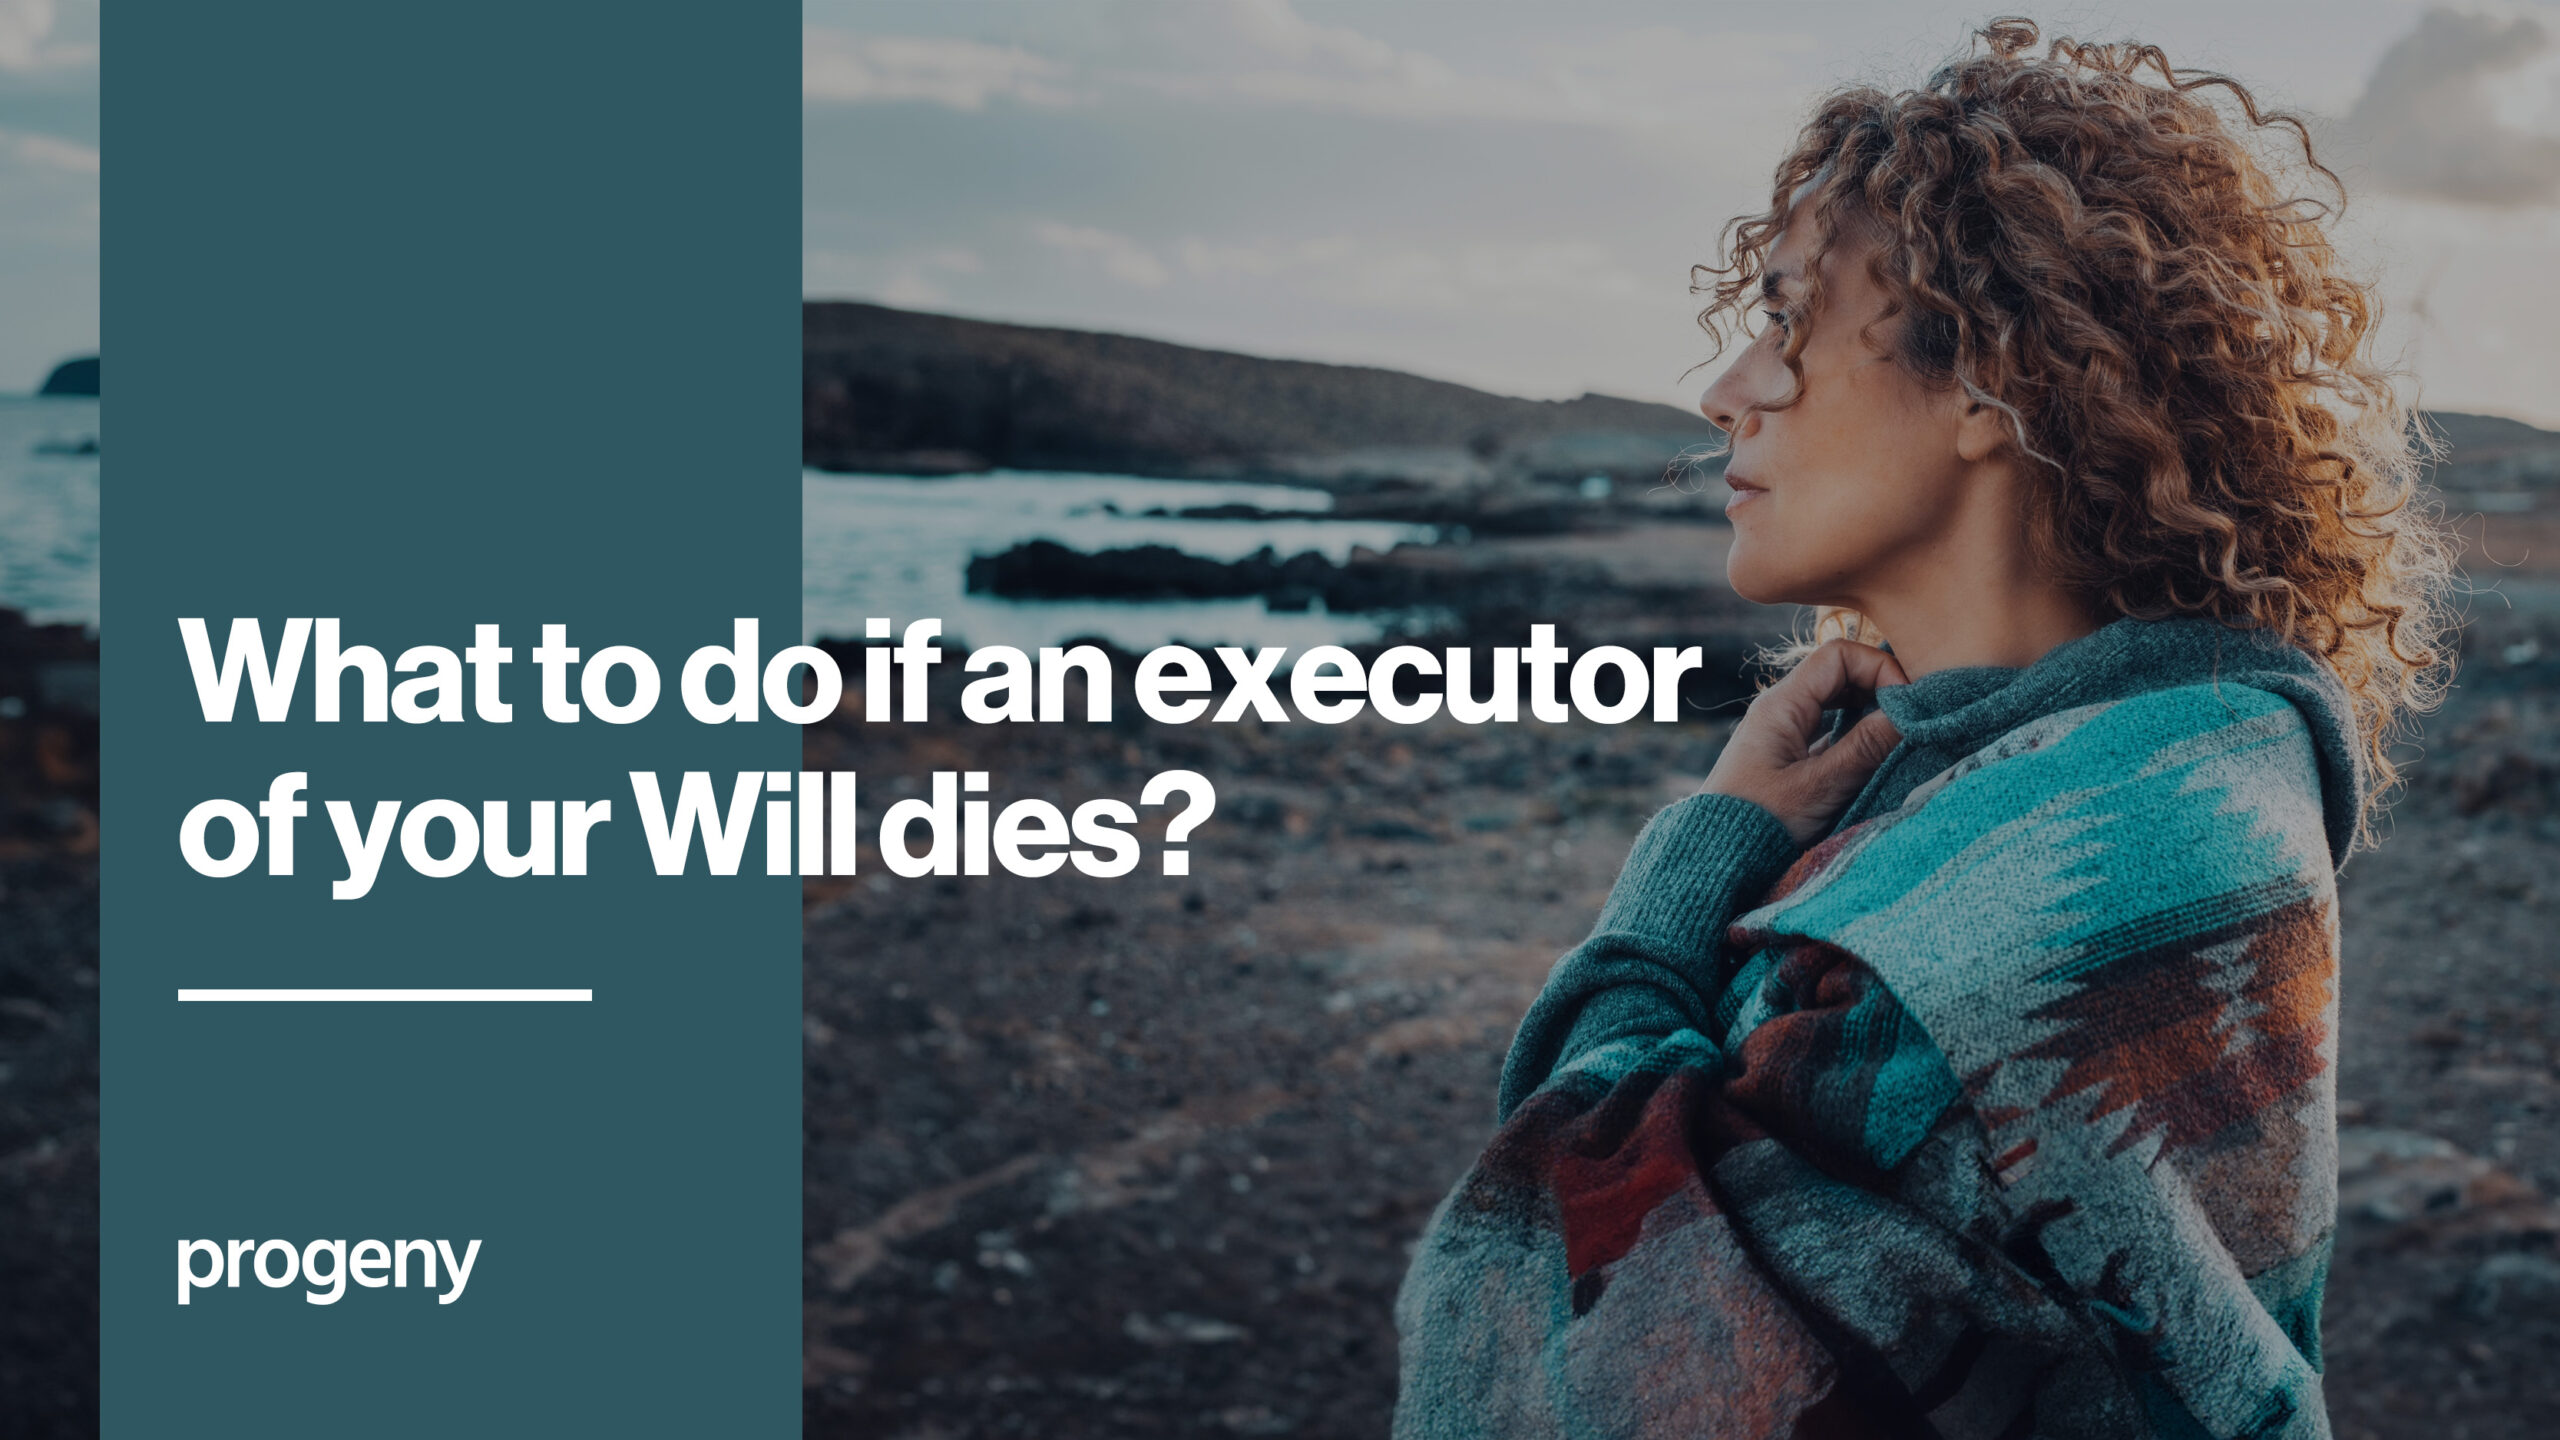 What to do if an Executor of your Will dies